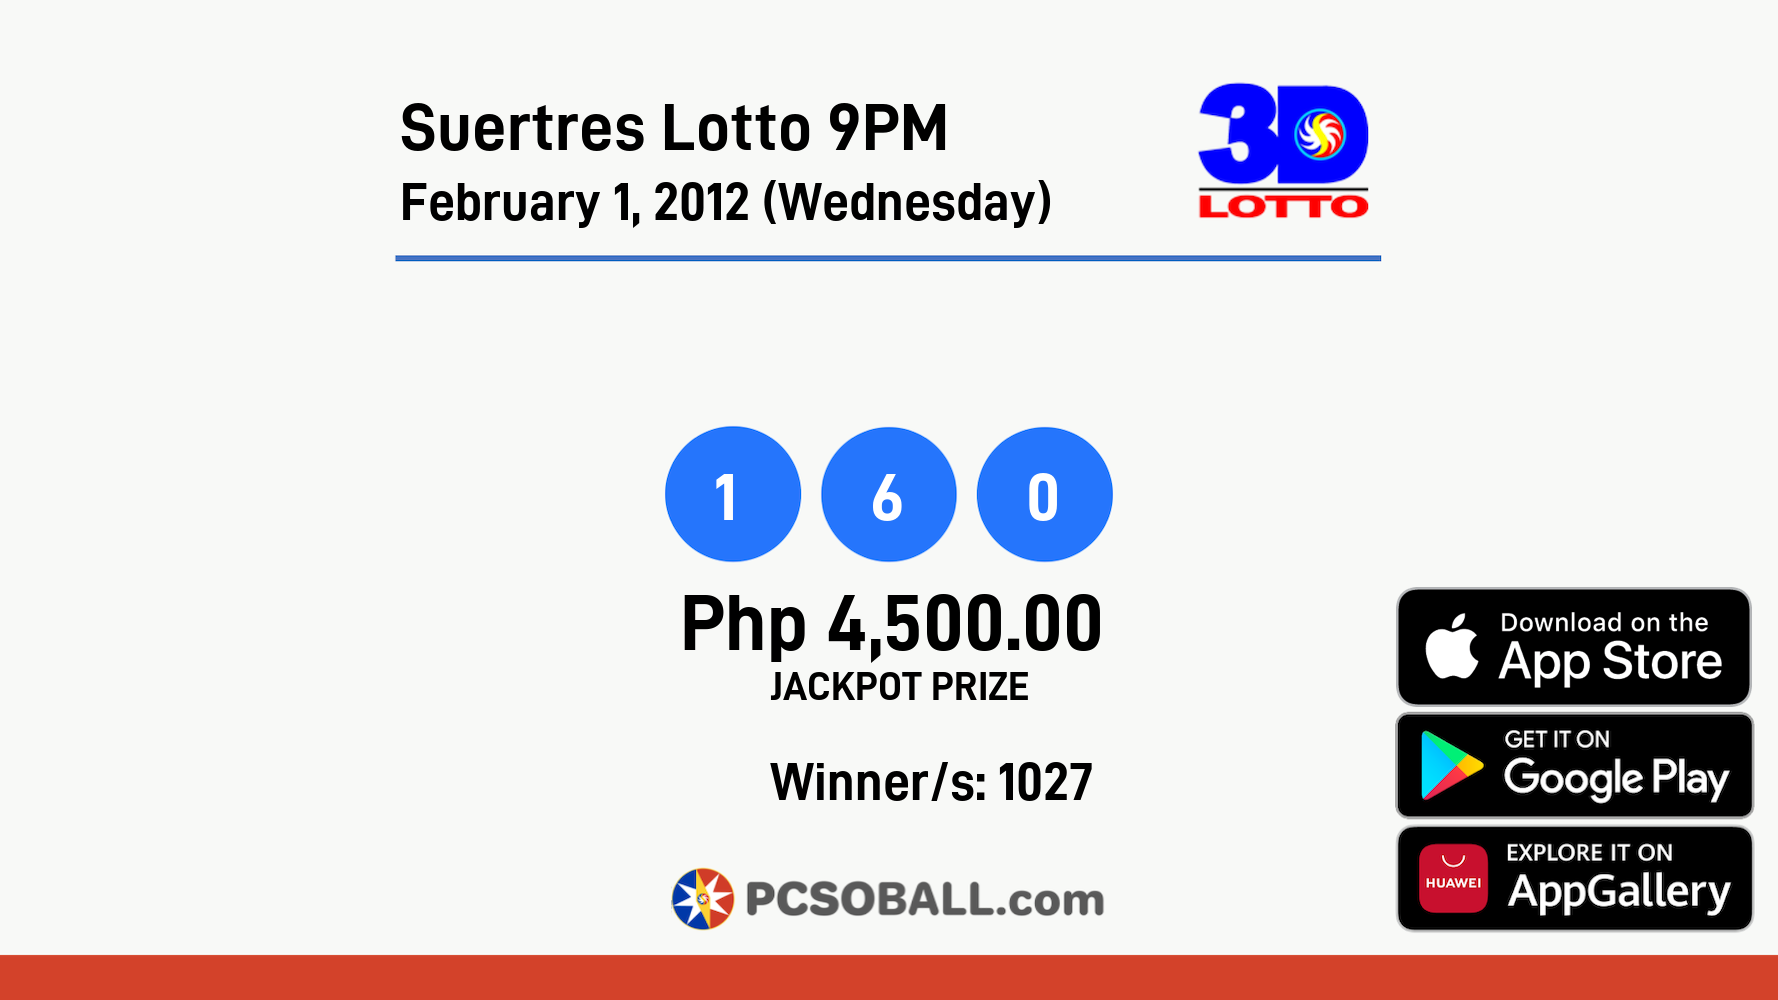 Suertres Lotto 9PM February 1, 2012 (Wednesday) Result